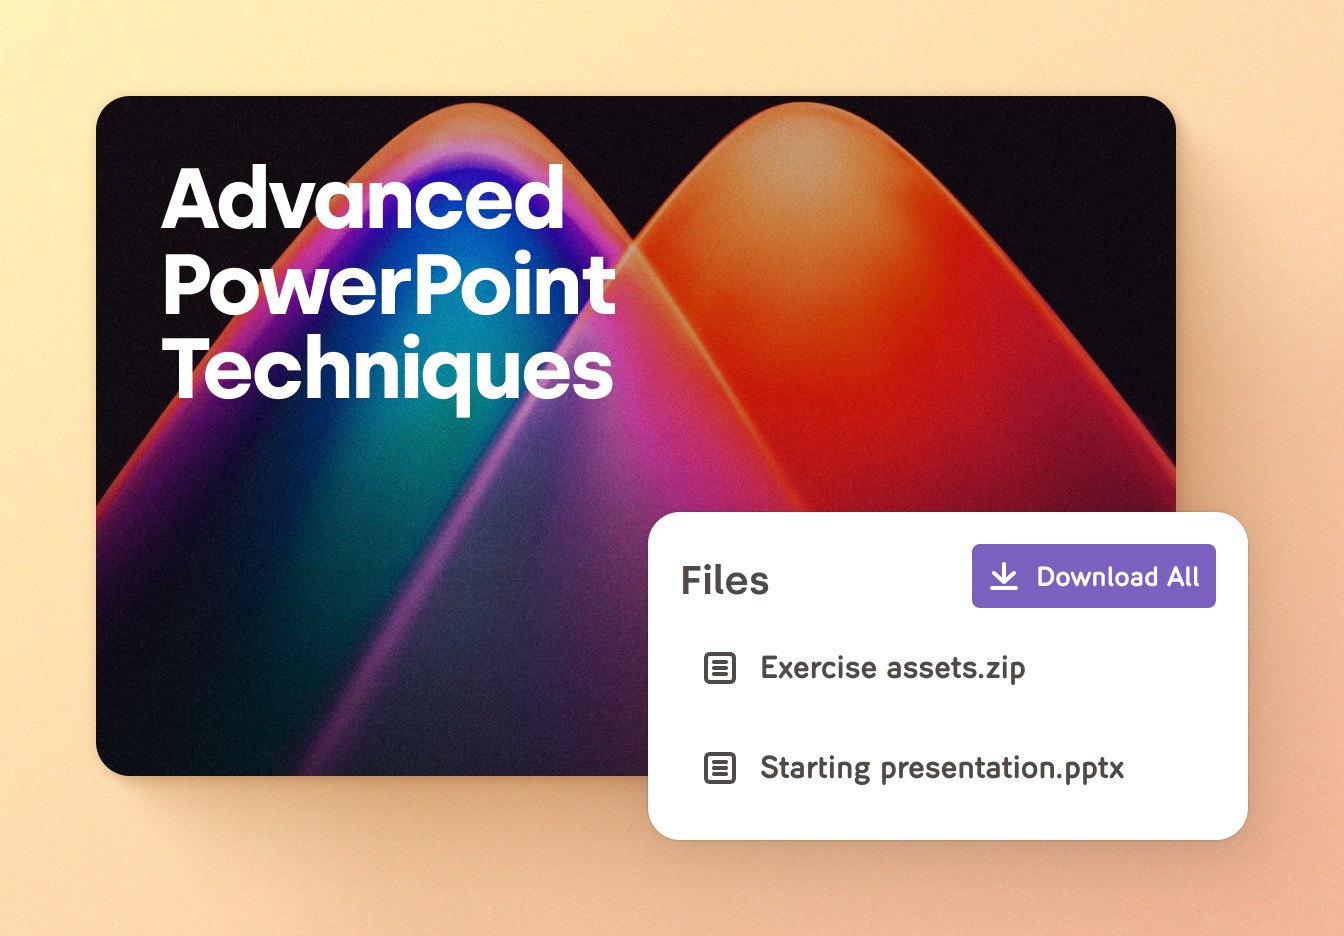 A presentation called 'Advanced PowerPoint Techniques'. A floating window on top showing 2 files: 'Exercise assets.zip' and 'Starting presentation.pptx'